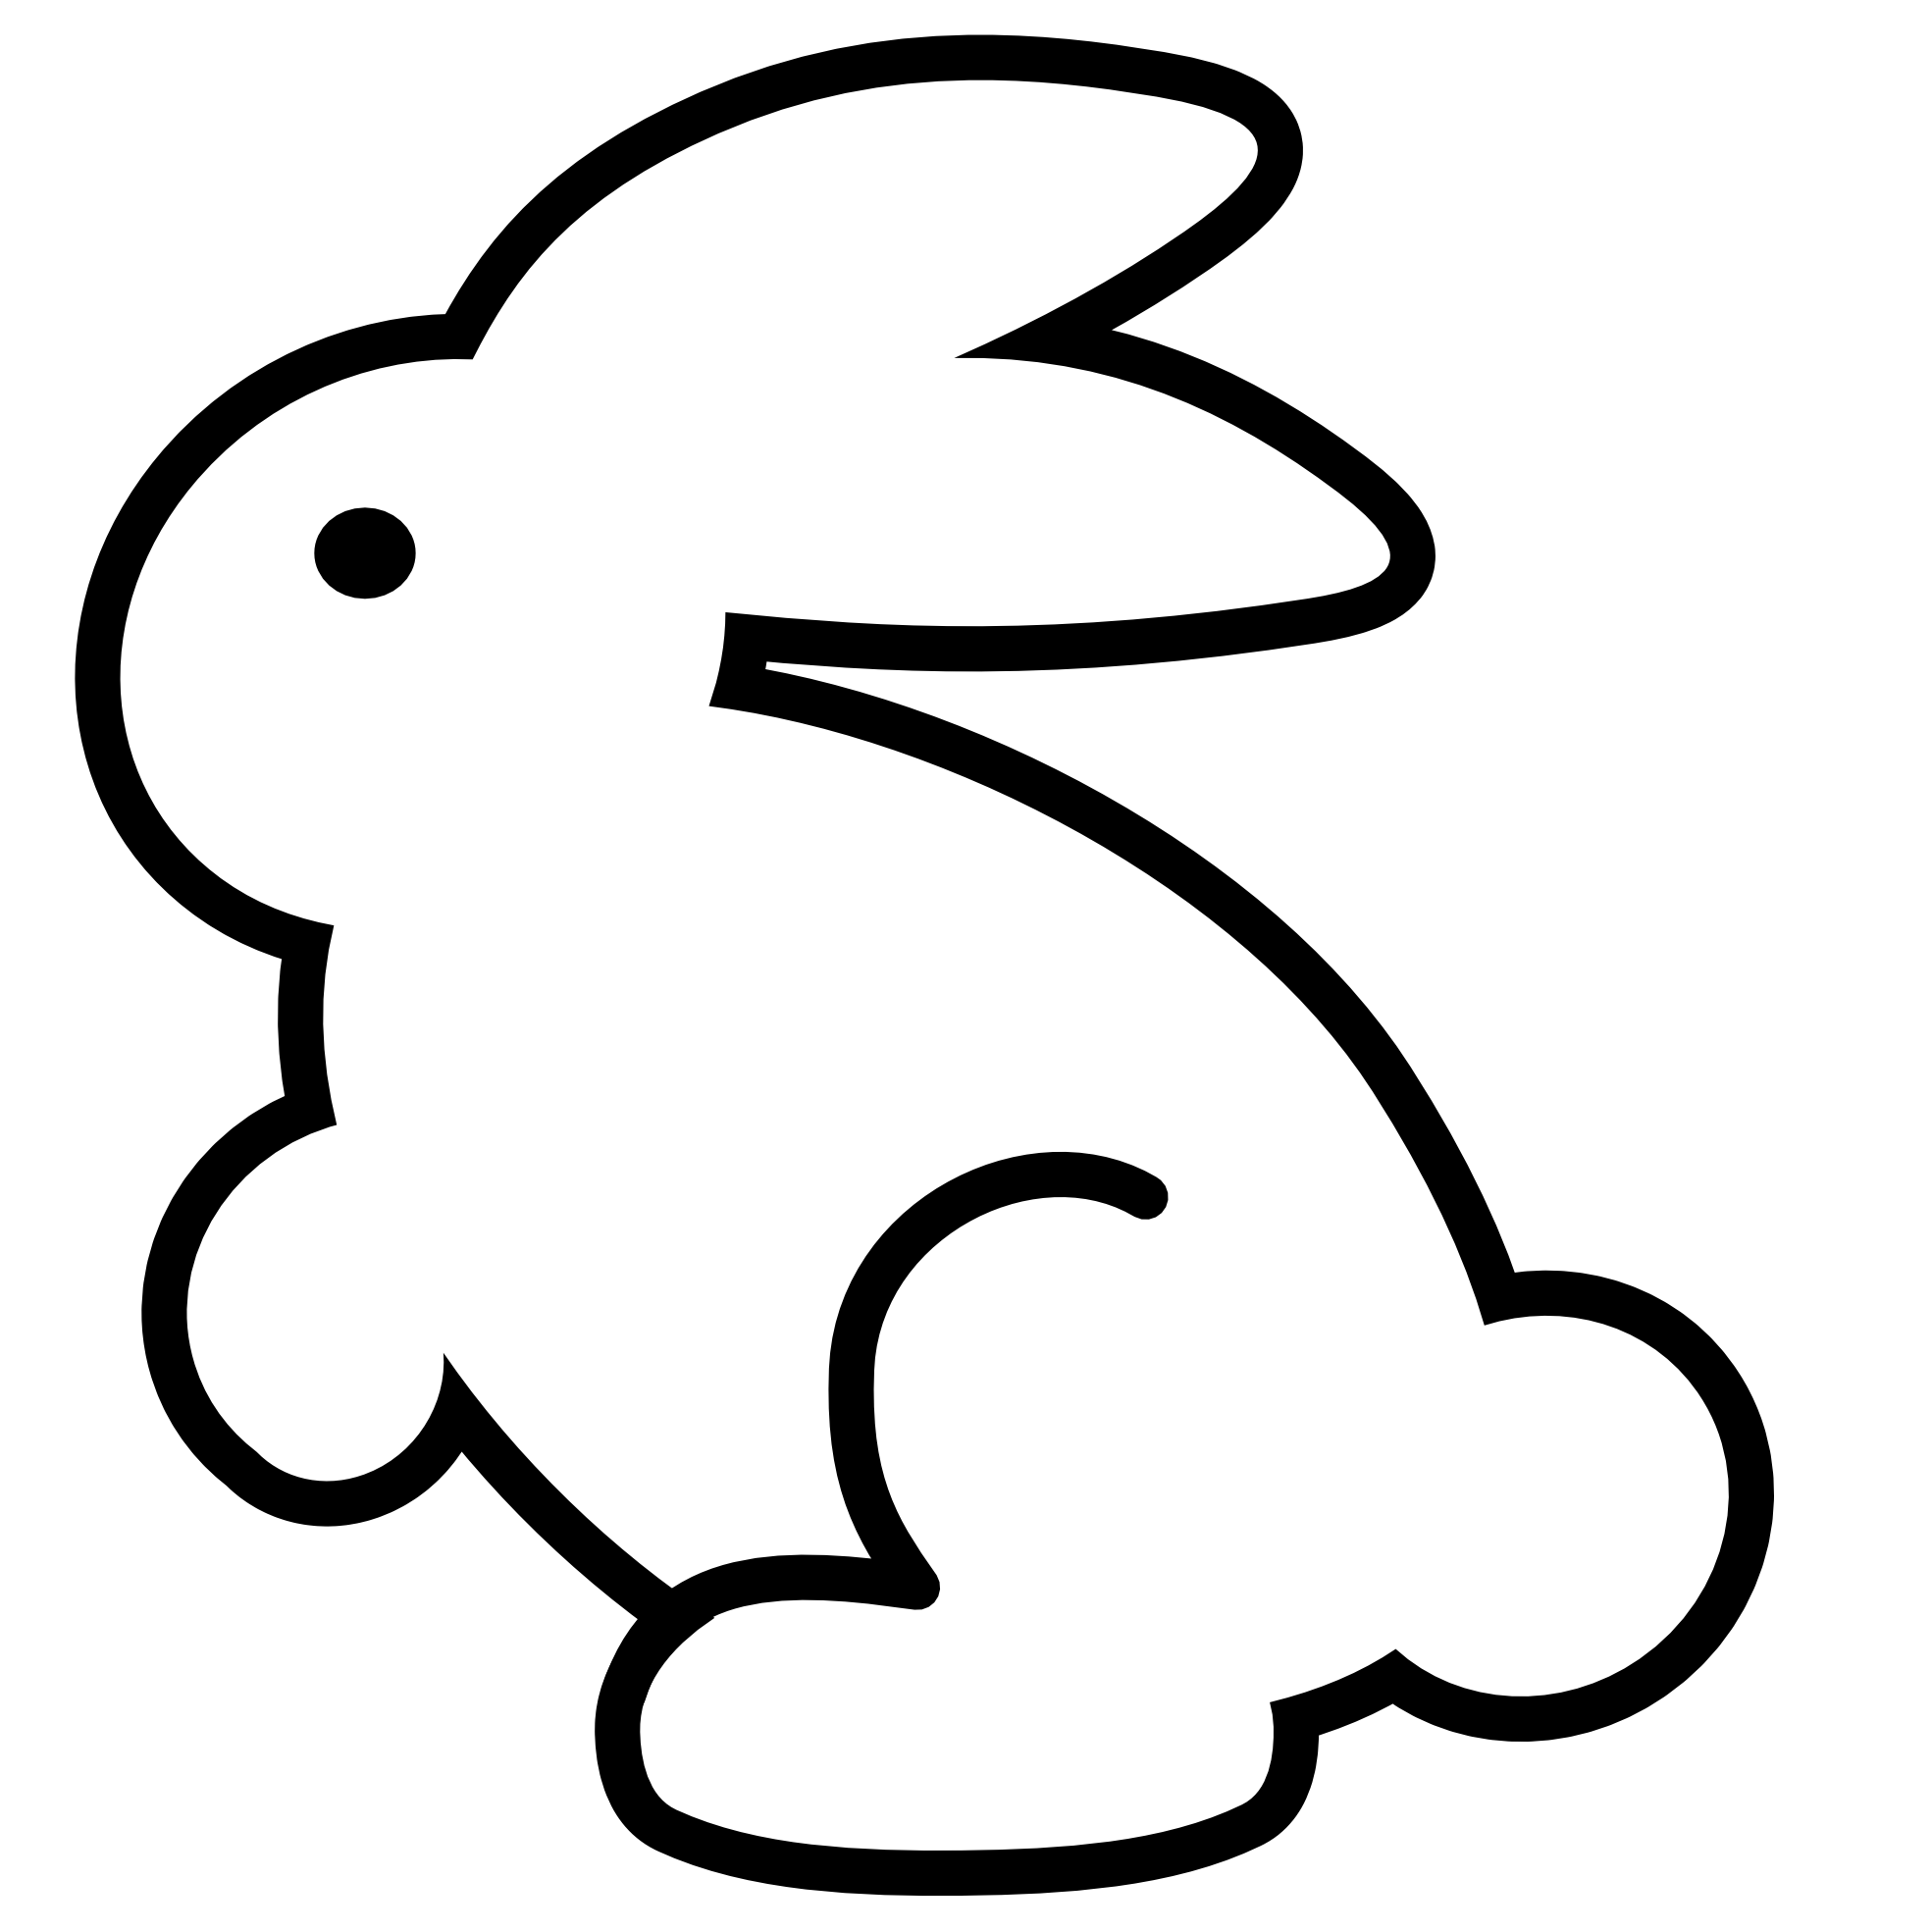 Fox clipart easter. Bunny black and white